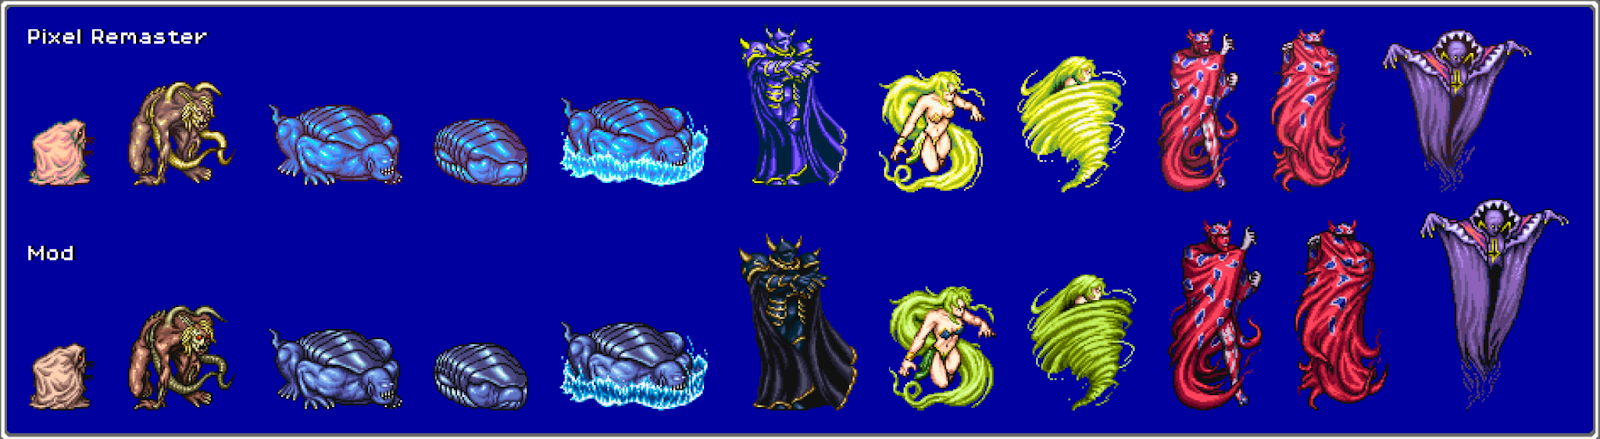 FF4: Complete Modding Guide and Index image 339